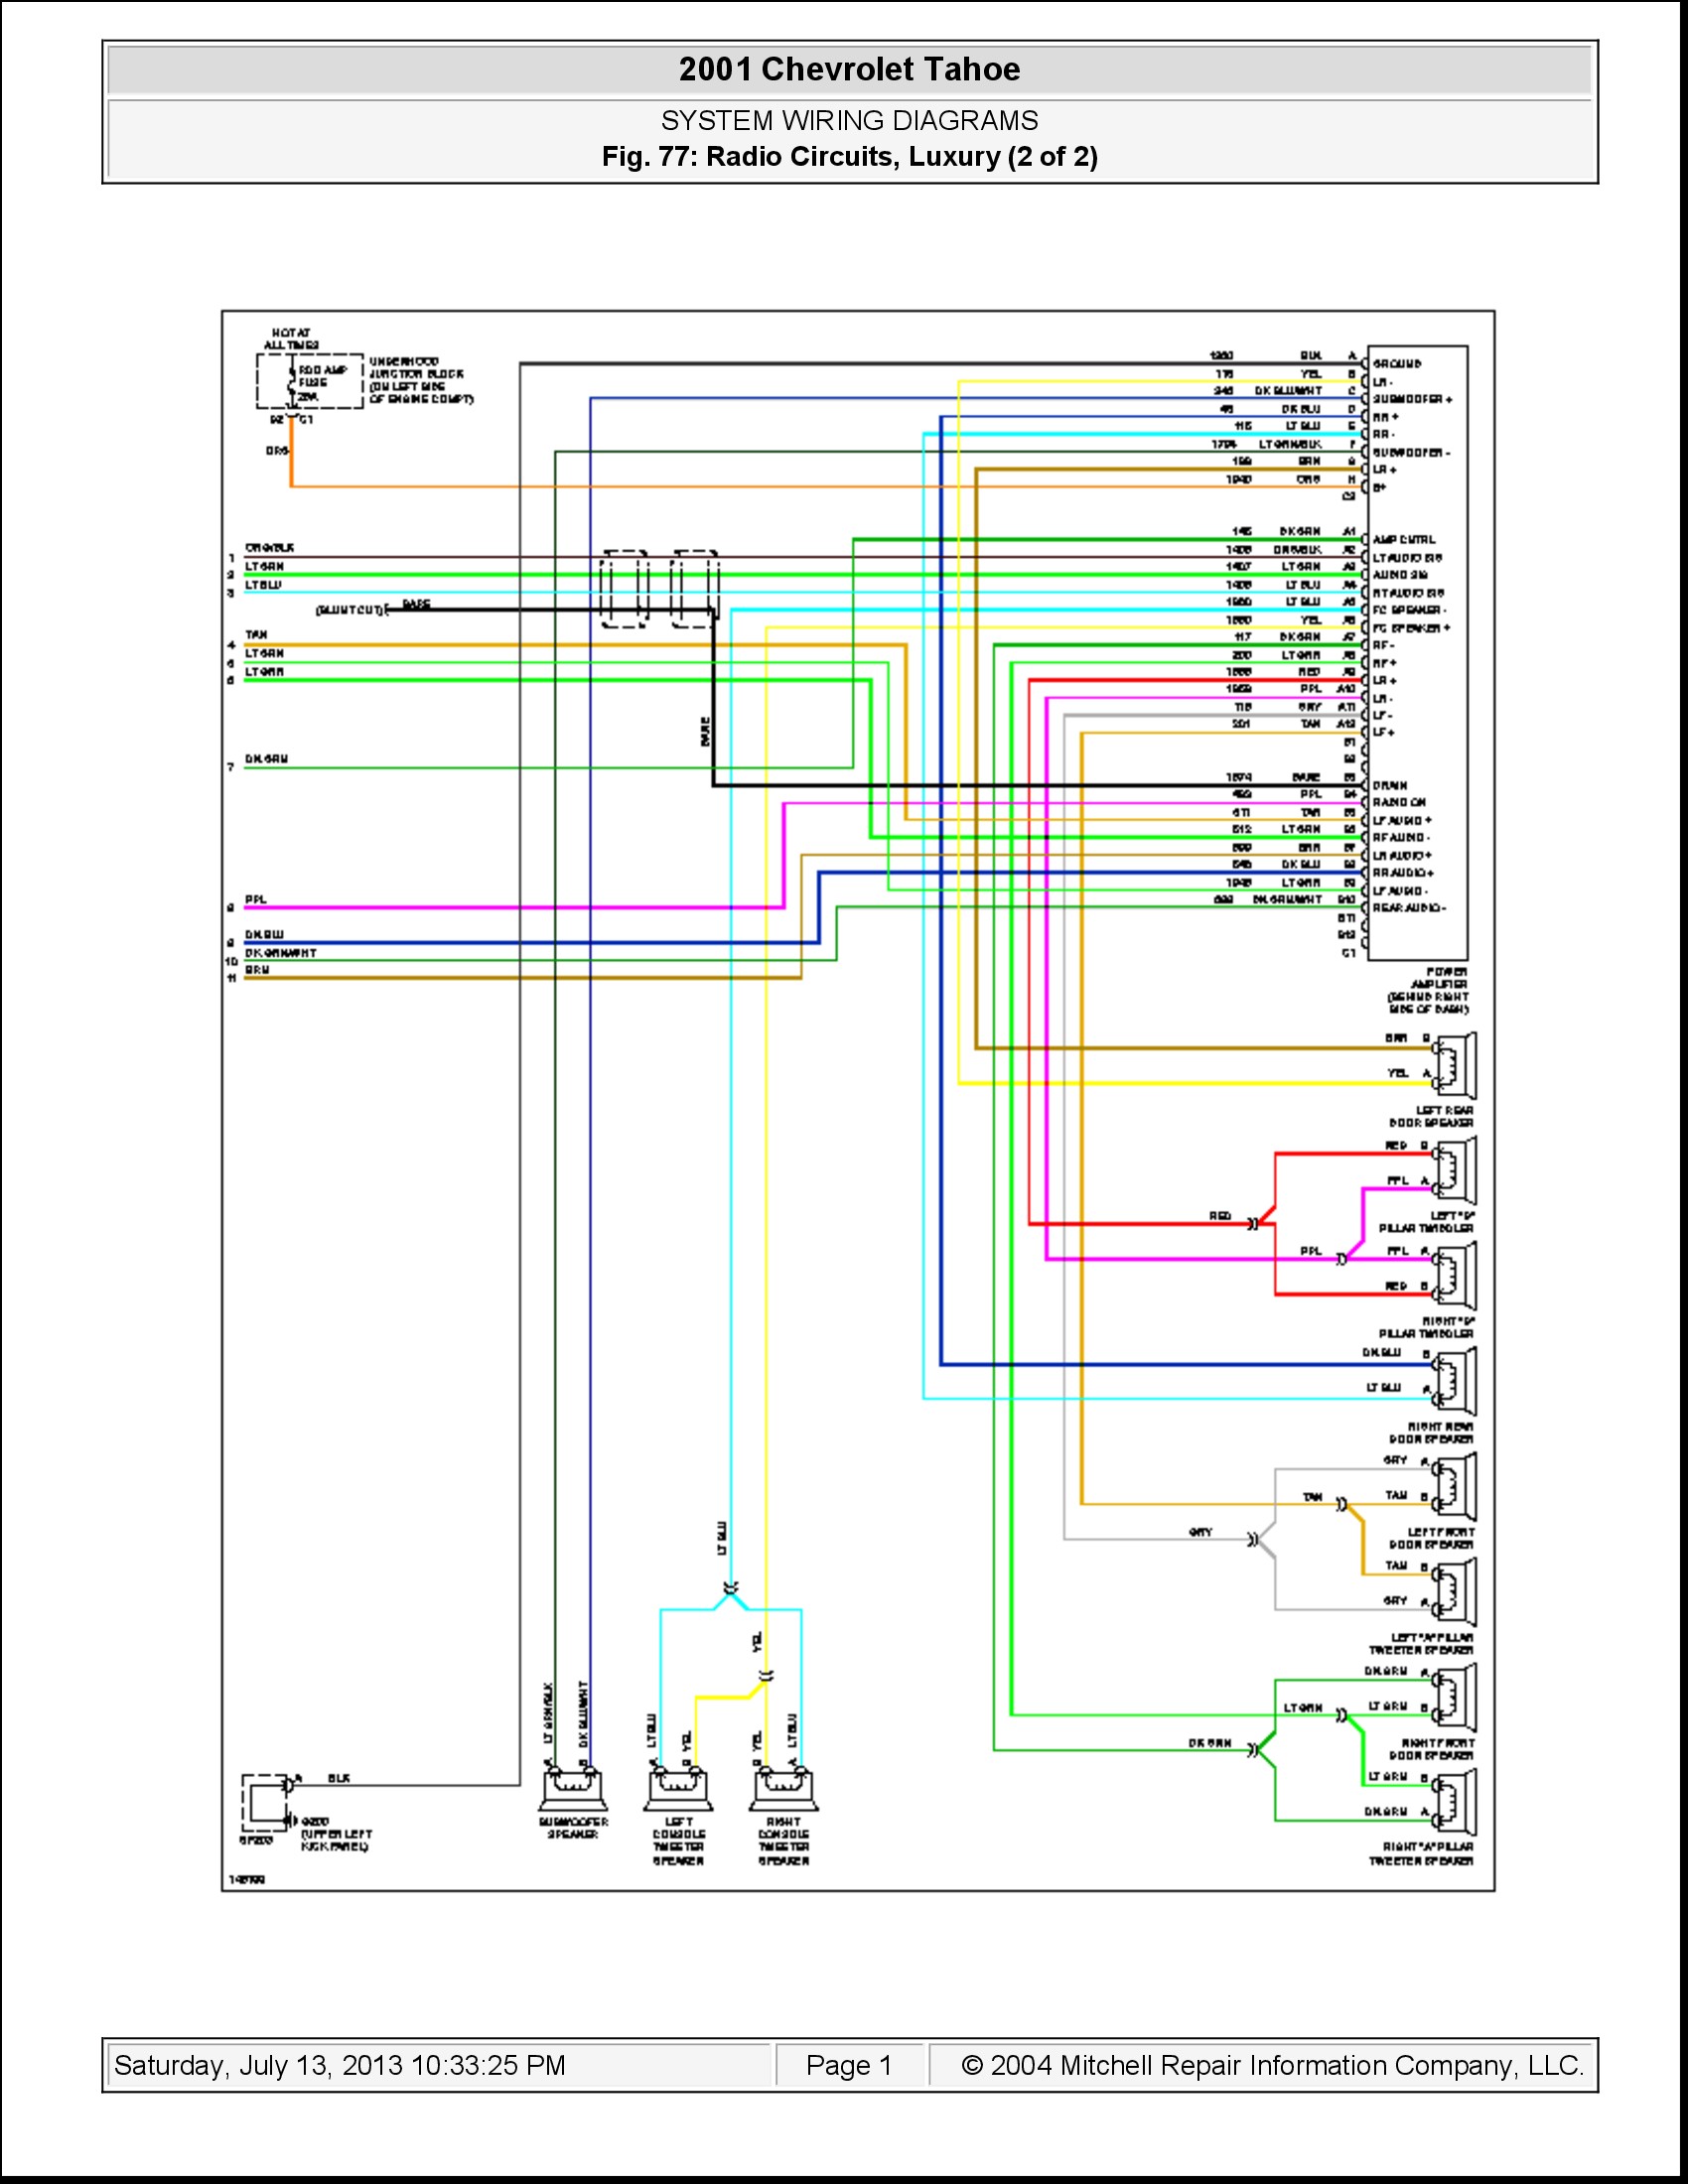 Cobalt Ignition Diagram  I Own A 2005 Chevy Cobalt In The